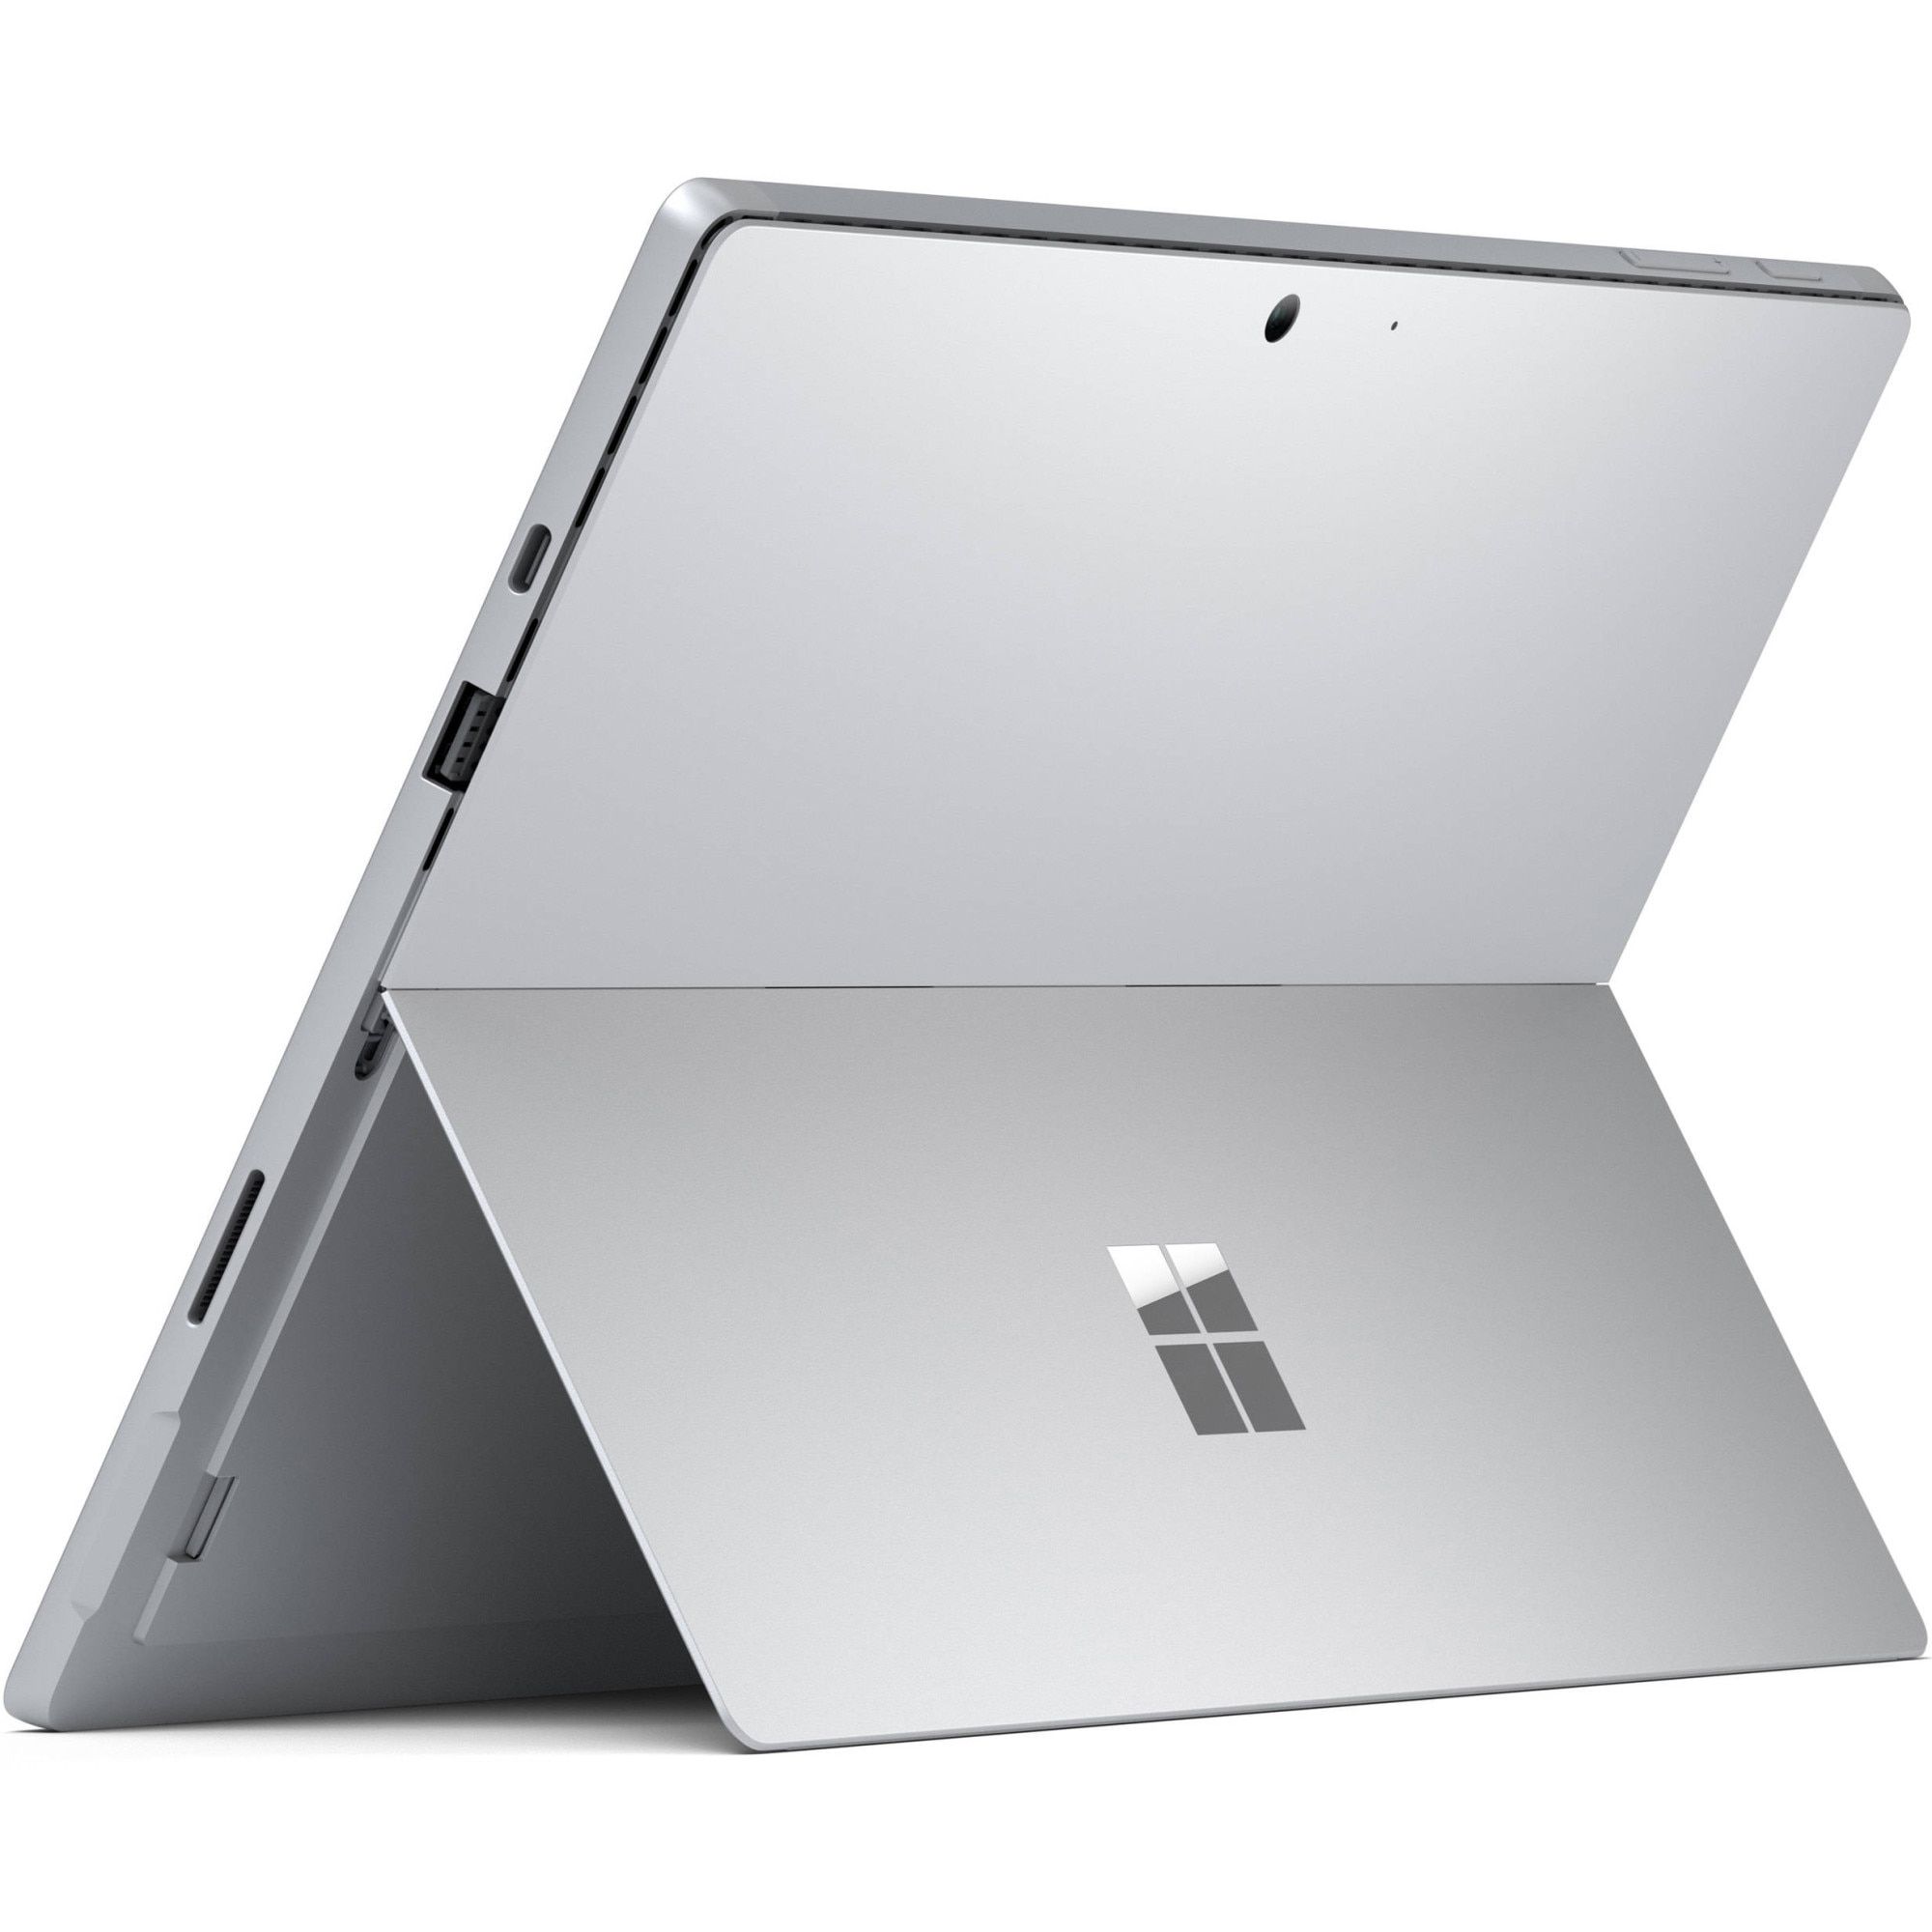 MICROSOFT Surface Pro7 2-in-1 Laptop i5-1035G4 12.3inch Touch PixelSense 8GB DDR4 256SSD Windows Hello 802.11ac Win10H P-rebusbish_9